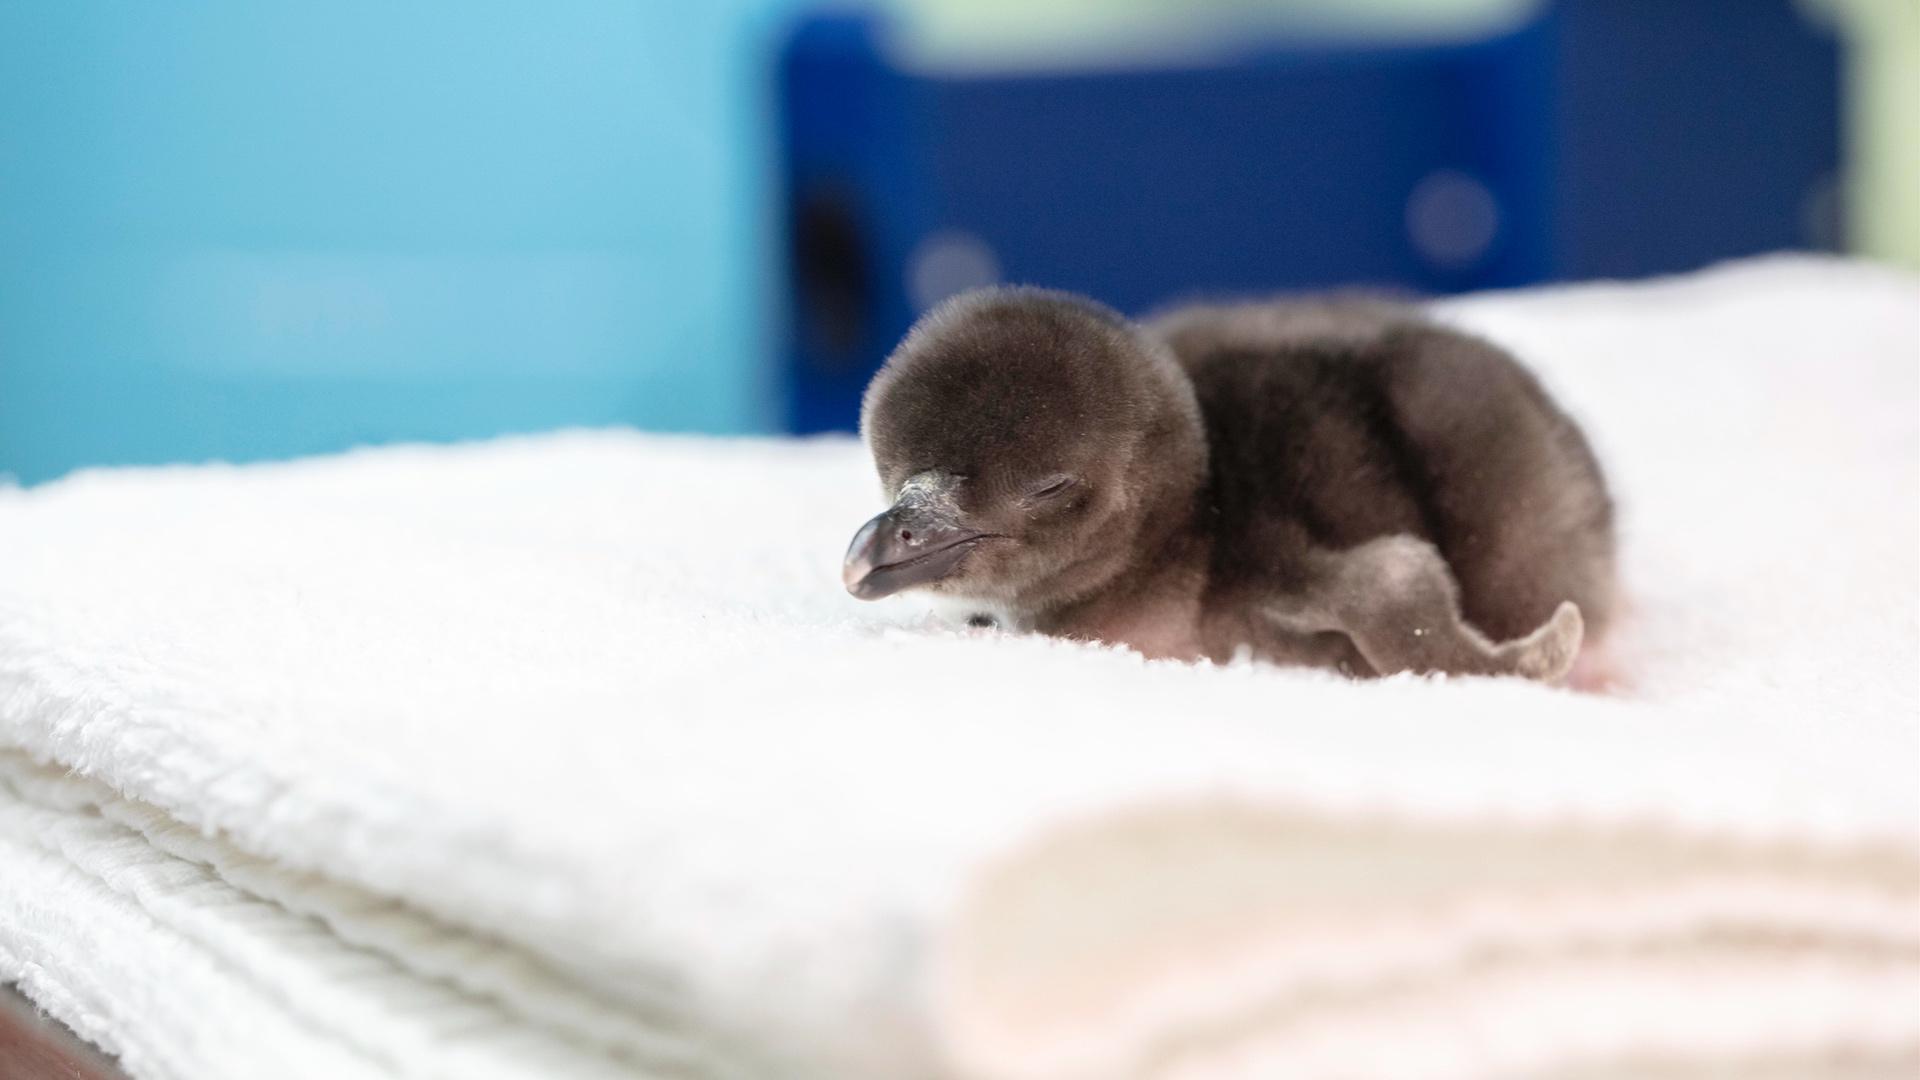 The Shedd Aquarium has shared new photos of its baby penguins, which hatched in May. (Shedd Aquarium/Brenna Hernandez) 